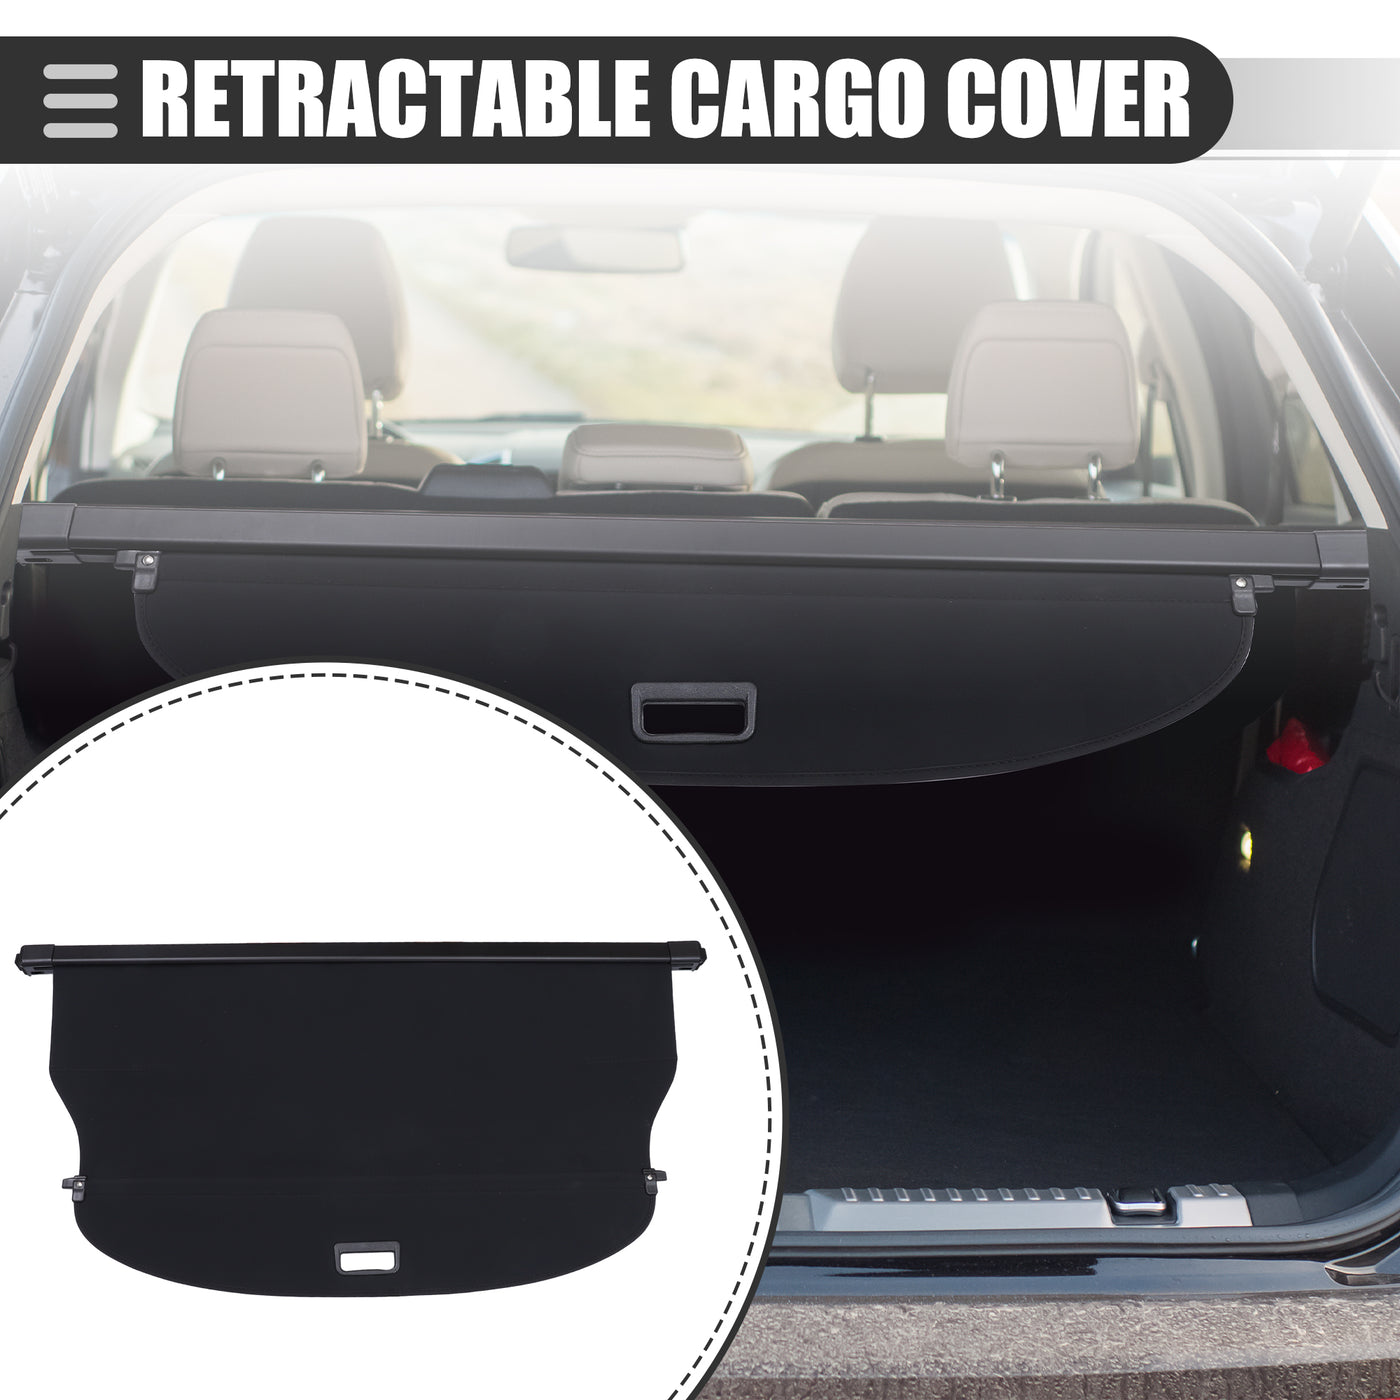 Motoforti Retractable Cargo Cover, Heat Resistant Rear Trunk Security Cover Shield Shade, for Nissan X-trail Rogue SV S SL 2021-2023, Waterproof Canvas, Black